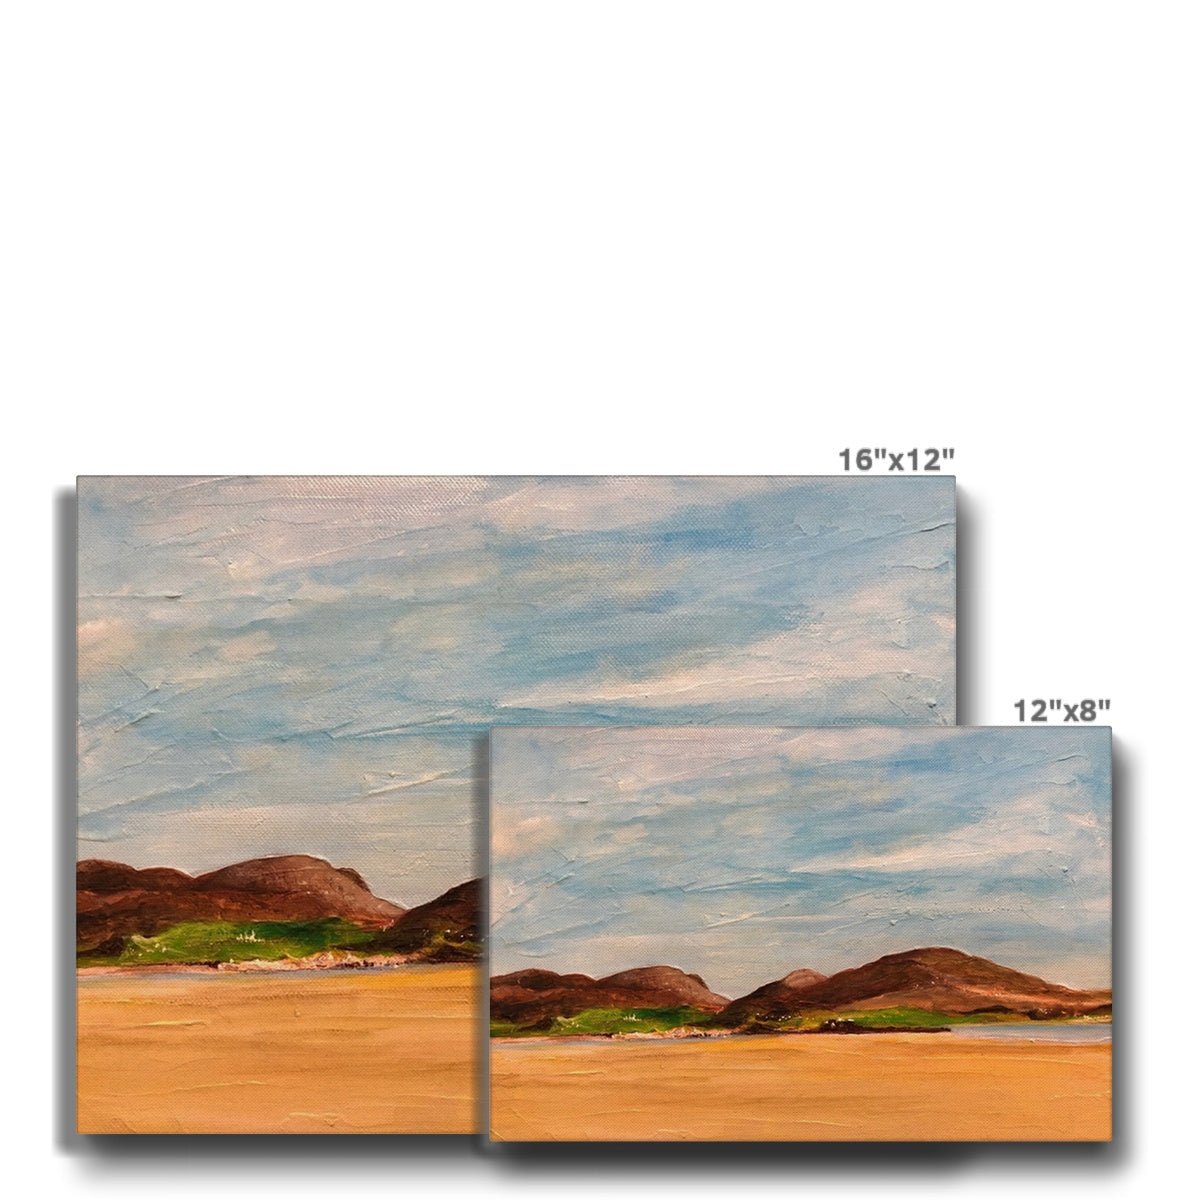 Uig Sands Lewis Painting | Canvas From Scotland-Contemporary Stretched Canvas Prints-Hebridean Islands Art Gallery-Paintings, Prints, Homeware, Art Gifts From Scotland By Scottish Artist Kevin Hunter